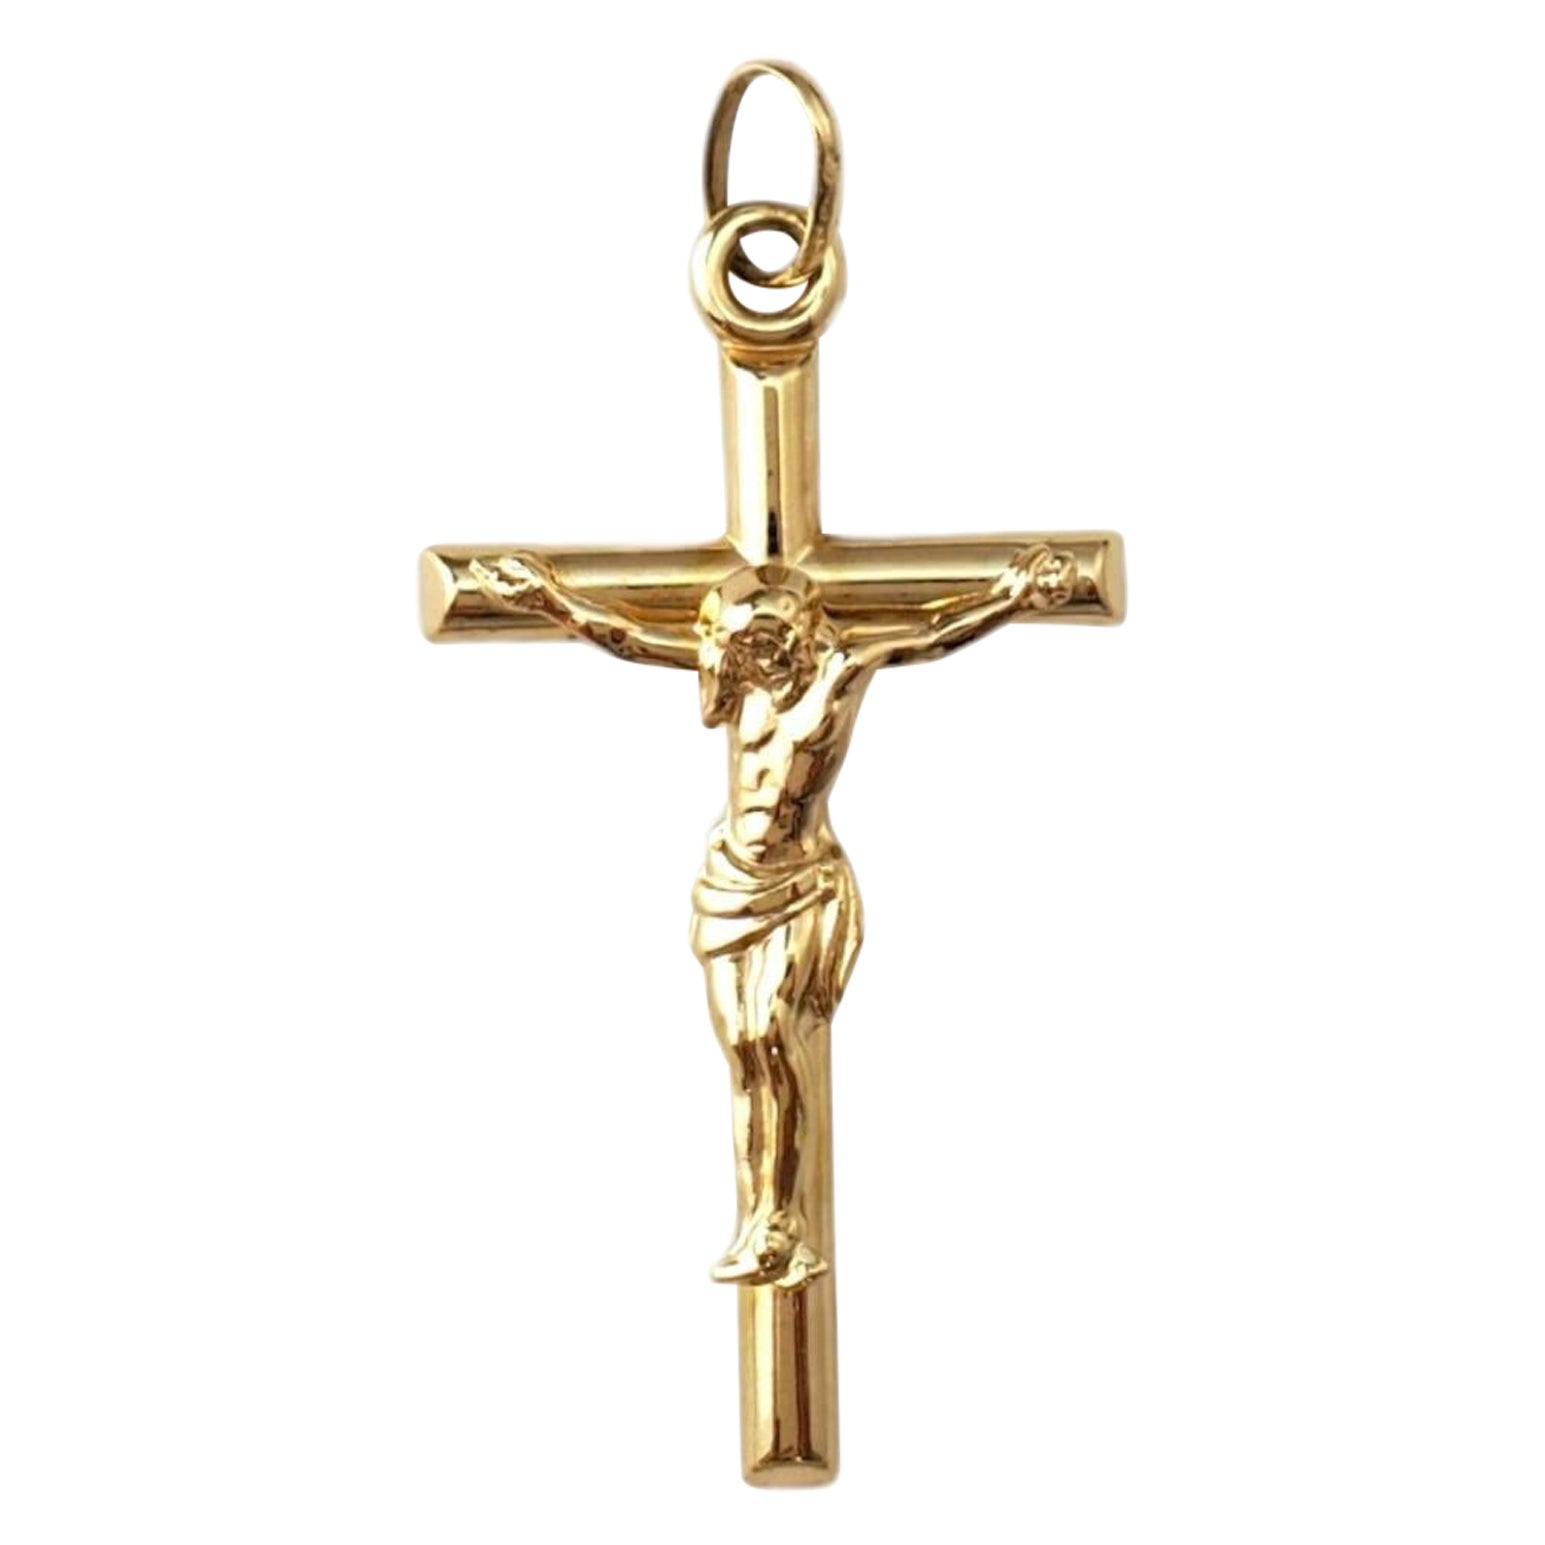 What is the meaning of a cross pendant?